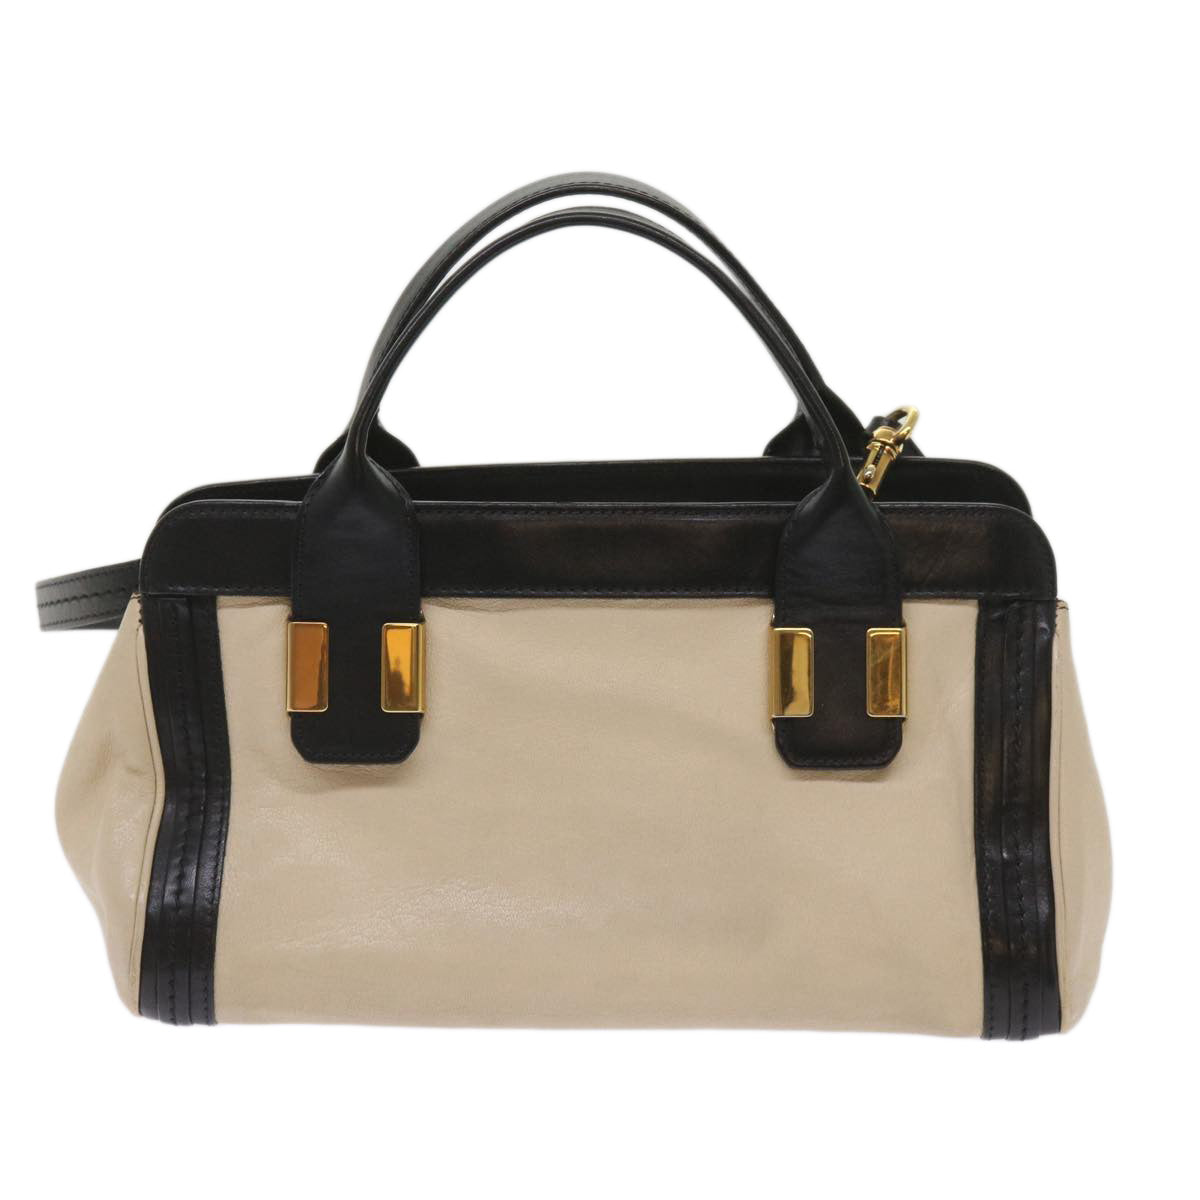 Chloe Alice Hand Bag Leather 2way Beige 04 14 63 65 Auth bs11871